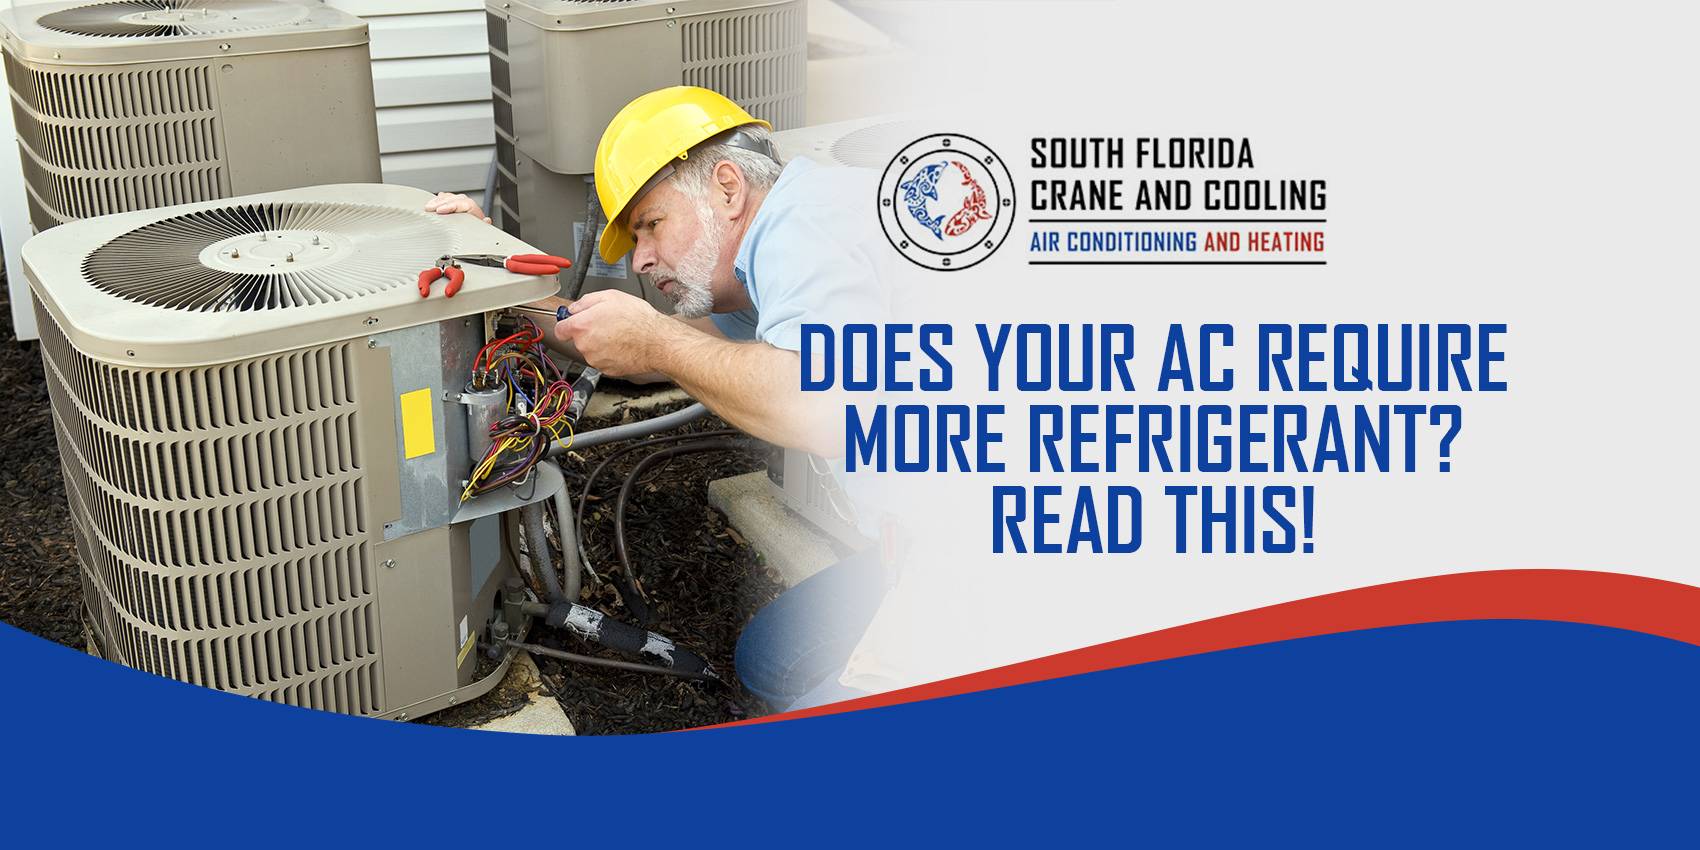 Does Your AC Require More Refrigerant Read This - South Florida